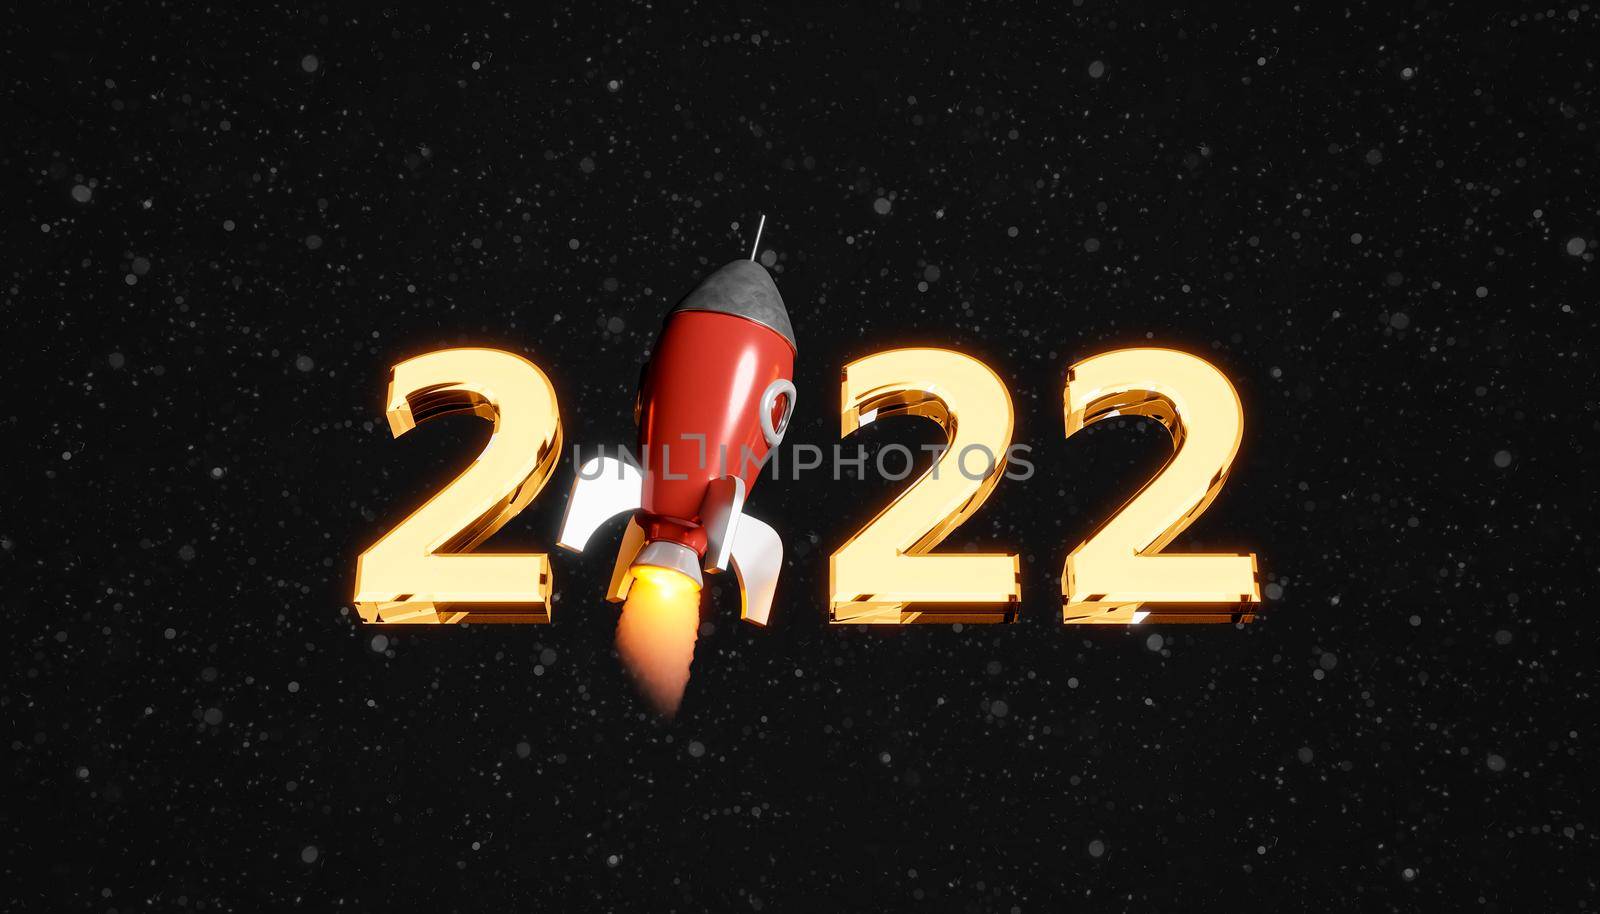 illuminated number 2022 with a rocket by asolano